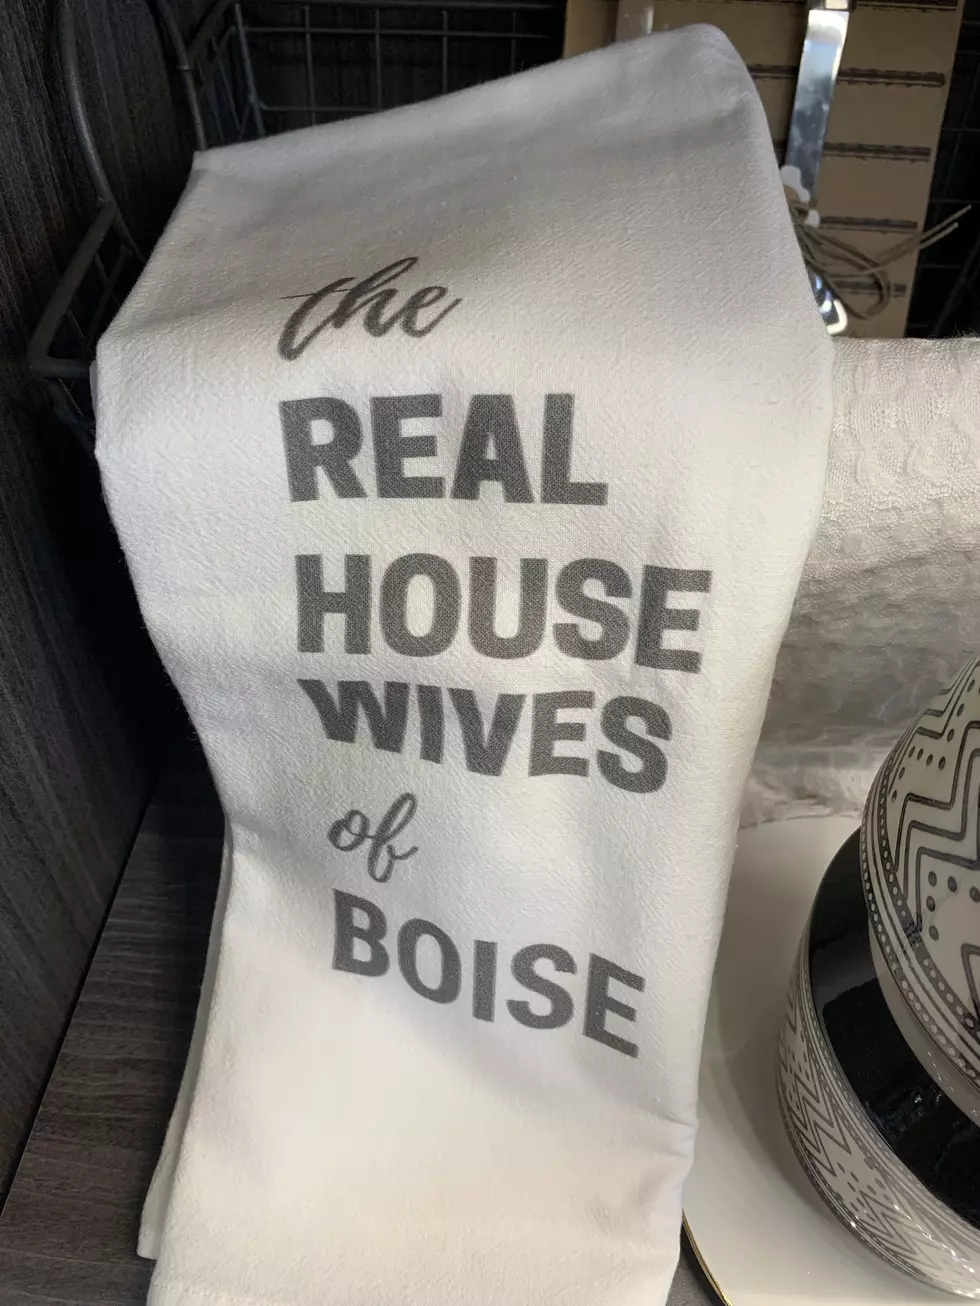 Could The Real Housewives Of Boise Be The Next Series In The Franchise?